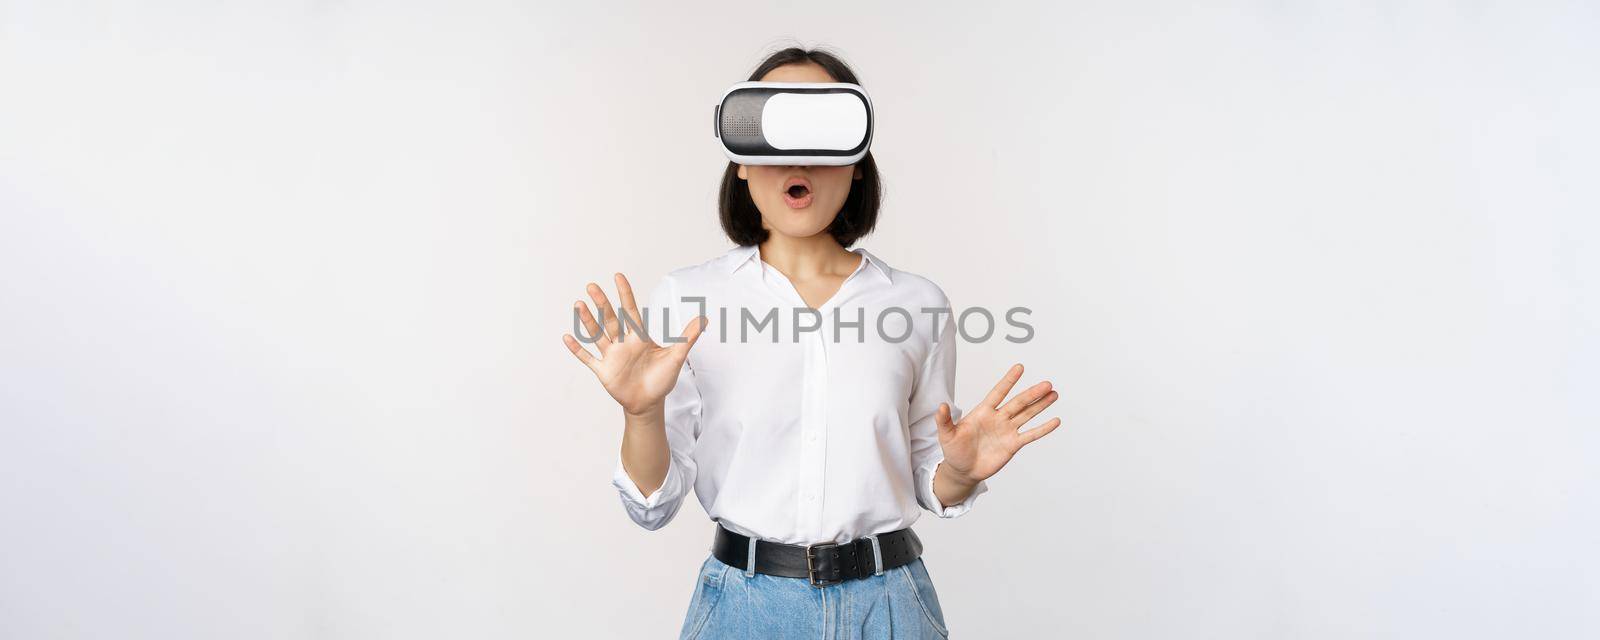 Amazed young woman in virtual reality, using vr glasses headset, standing over white background. Technology concept